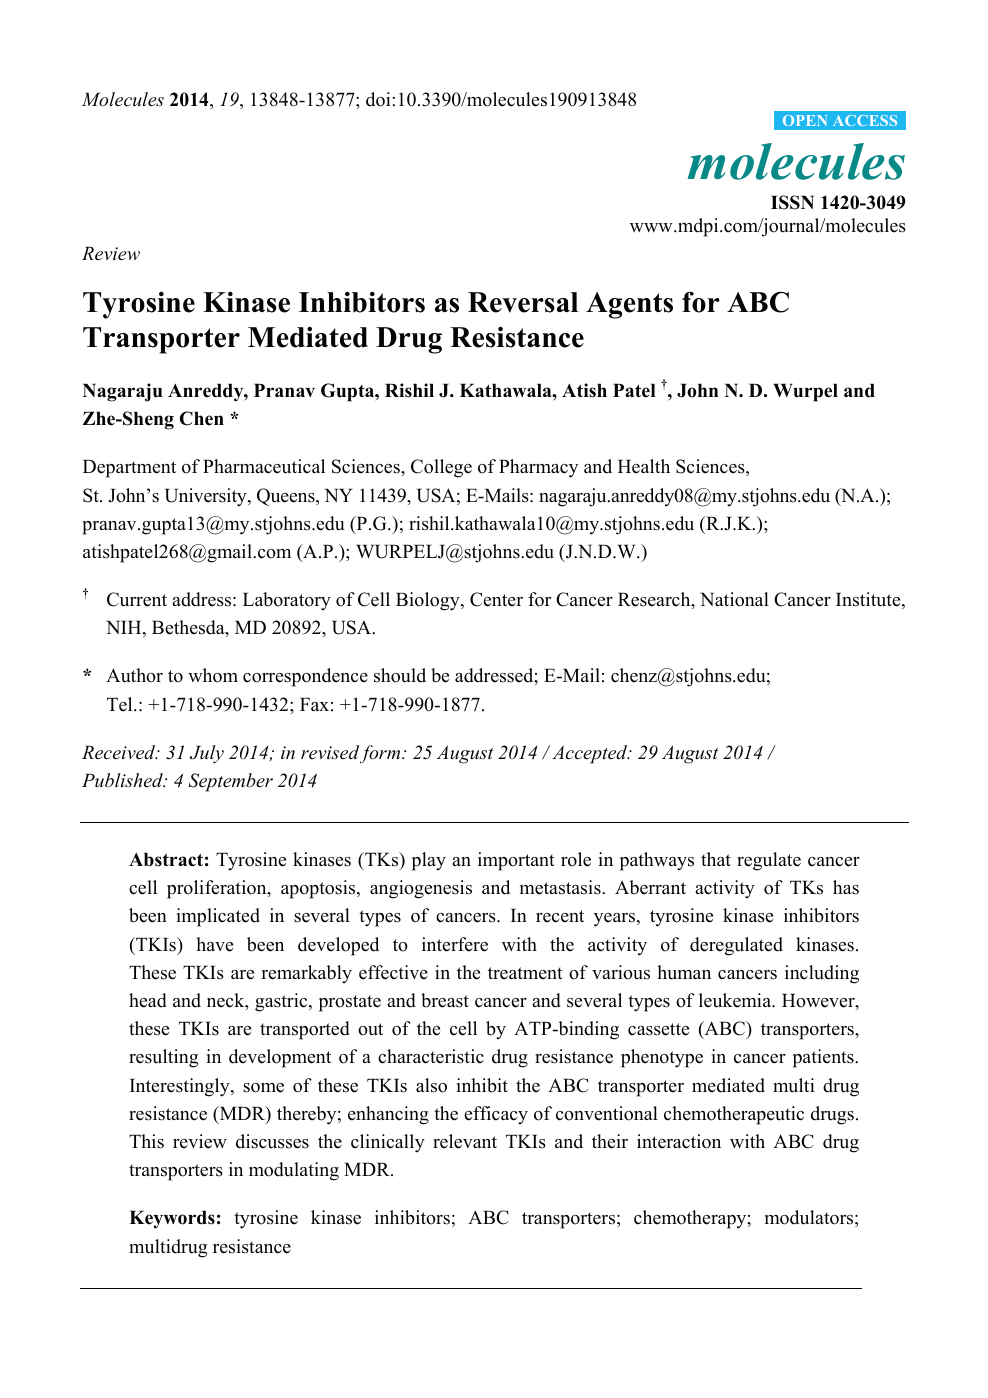 Tyrosine Kinase Inhibitors As Reversal Agents For Abc Transporter Mediated Drug Resistance Topic Of Research Paper In Biological Sciences Download Scholarly Article Pdf And Read For Free On Cyberleninka Open Science